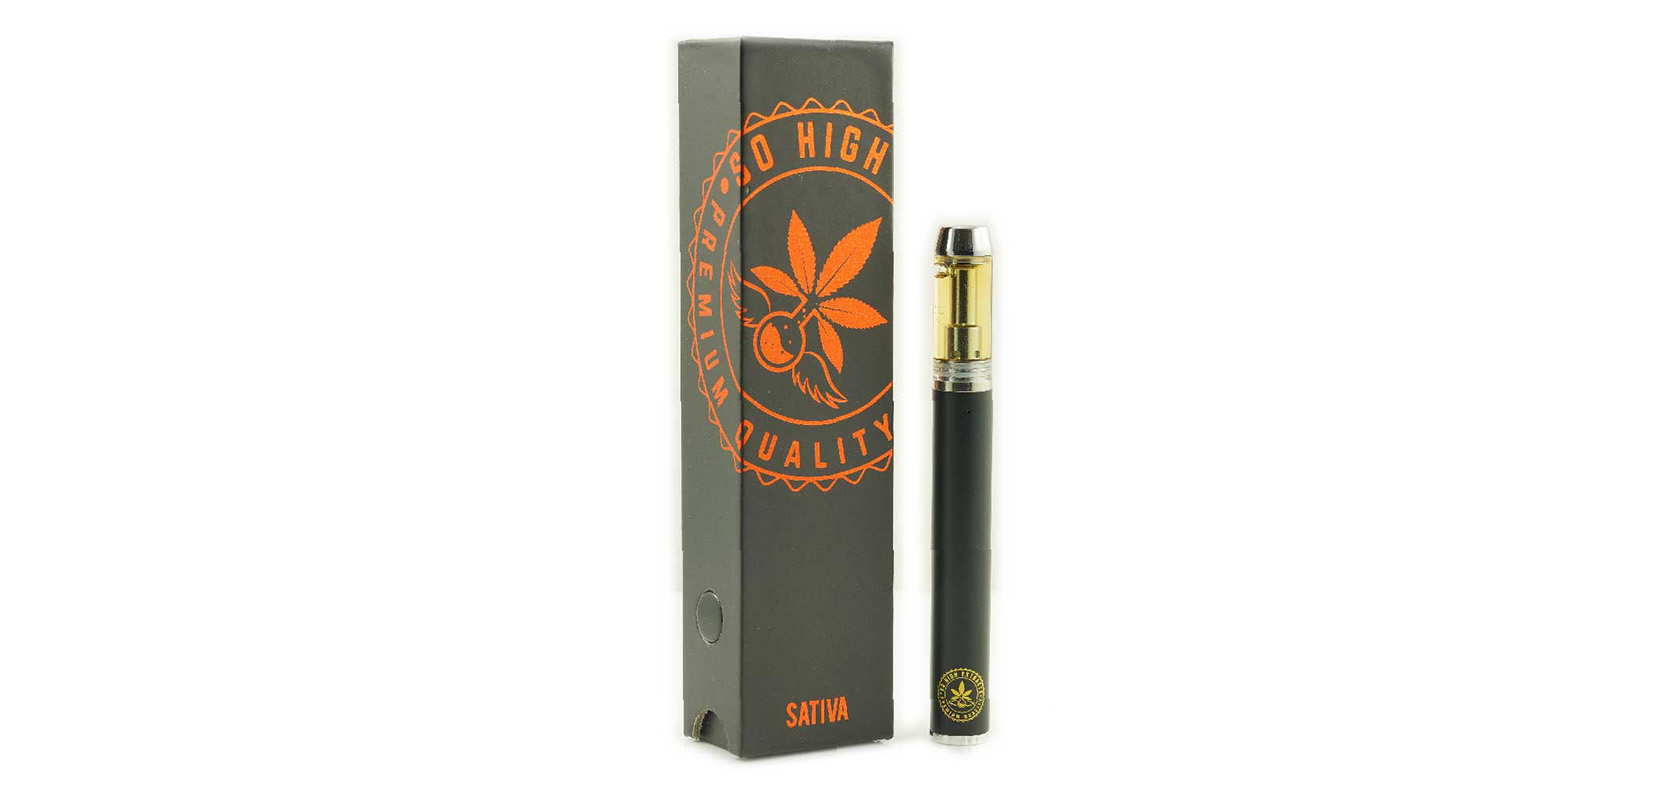 Disposable Vape Pen Jack Herer strain weed vape. Deals on weed from mail order marijuana online dispensary for BC cannabis and dispensary weed.